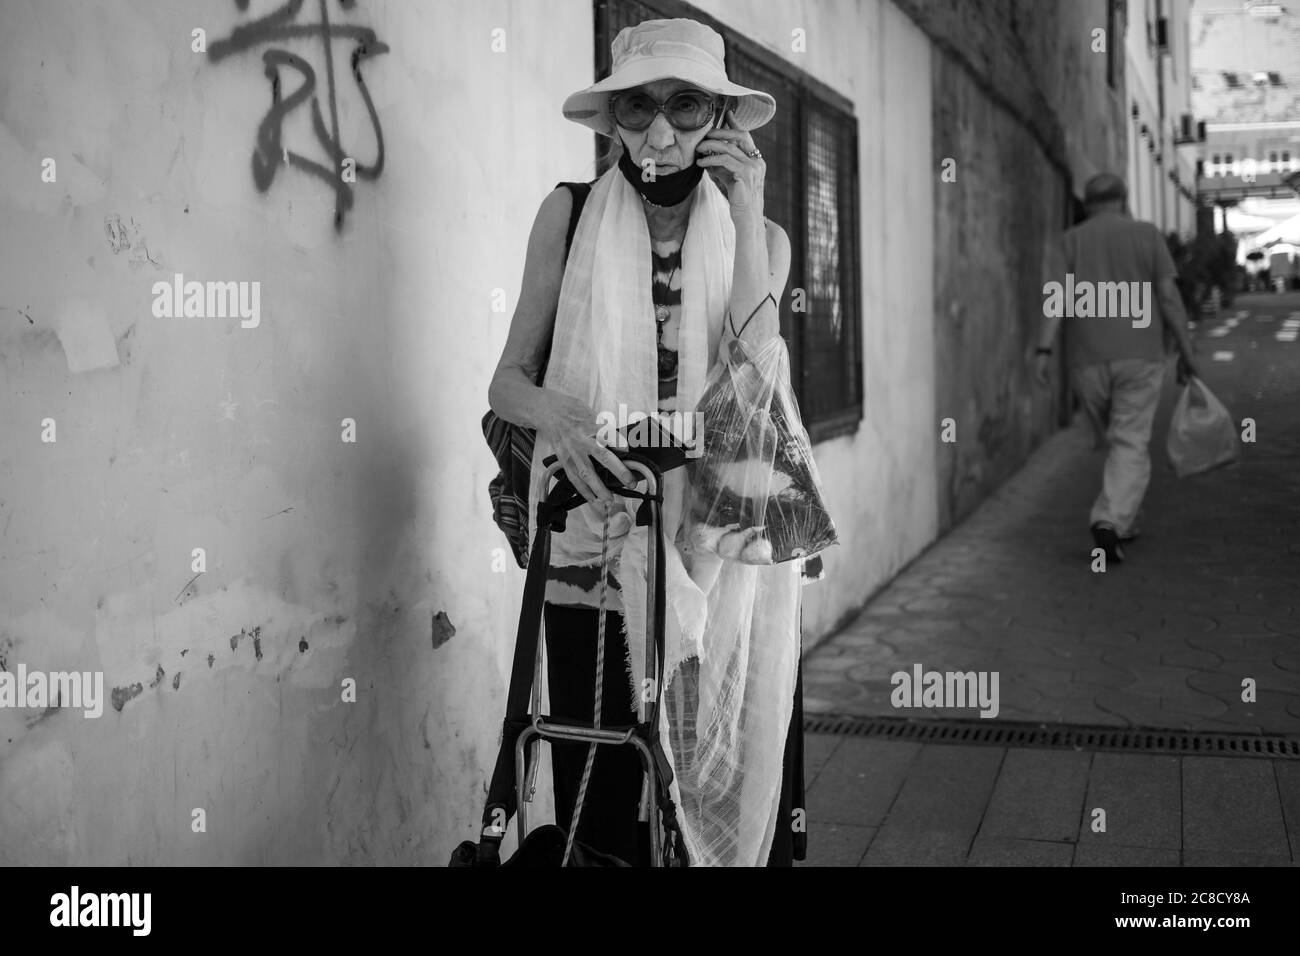 Belgrade, Serbia, Jul 9, 2020: An elderly lady standing on the street and talking by phone (B/W) Stock Photo